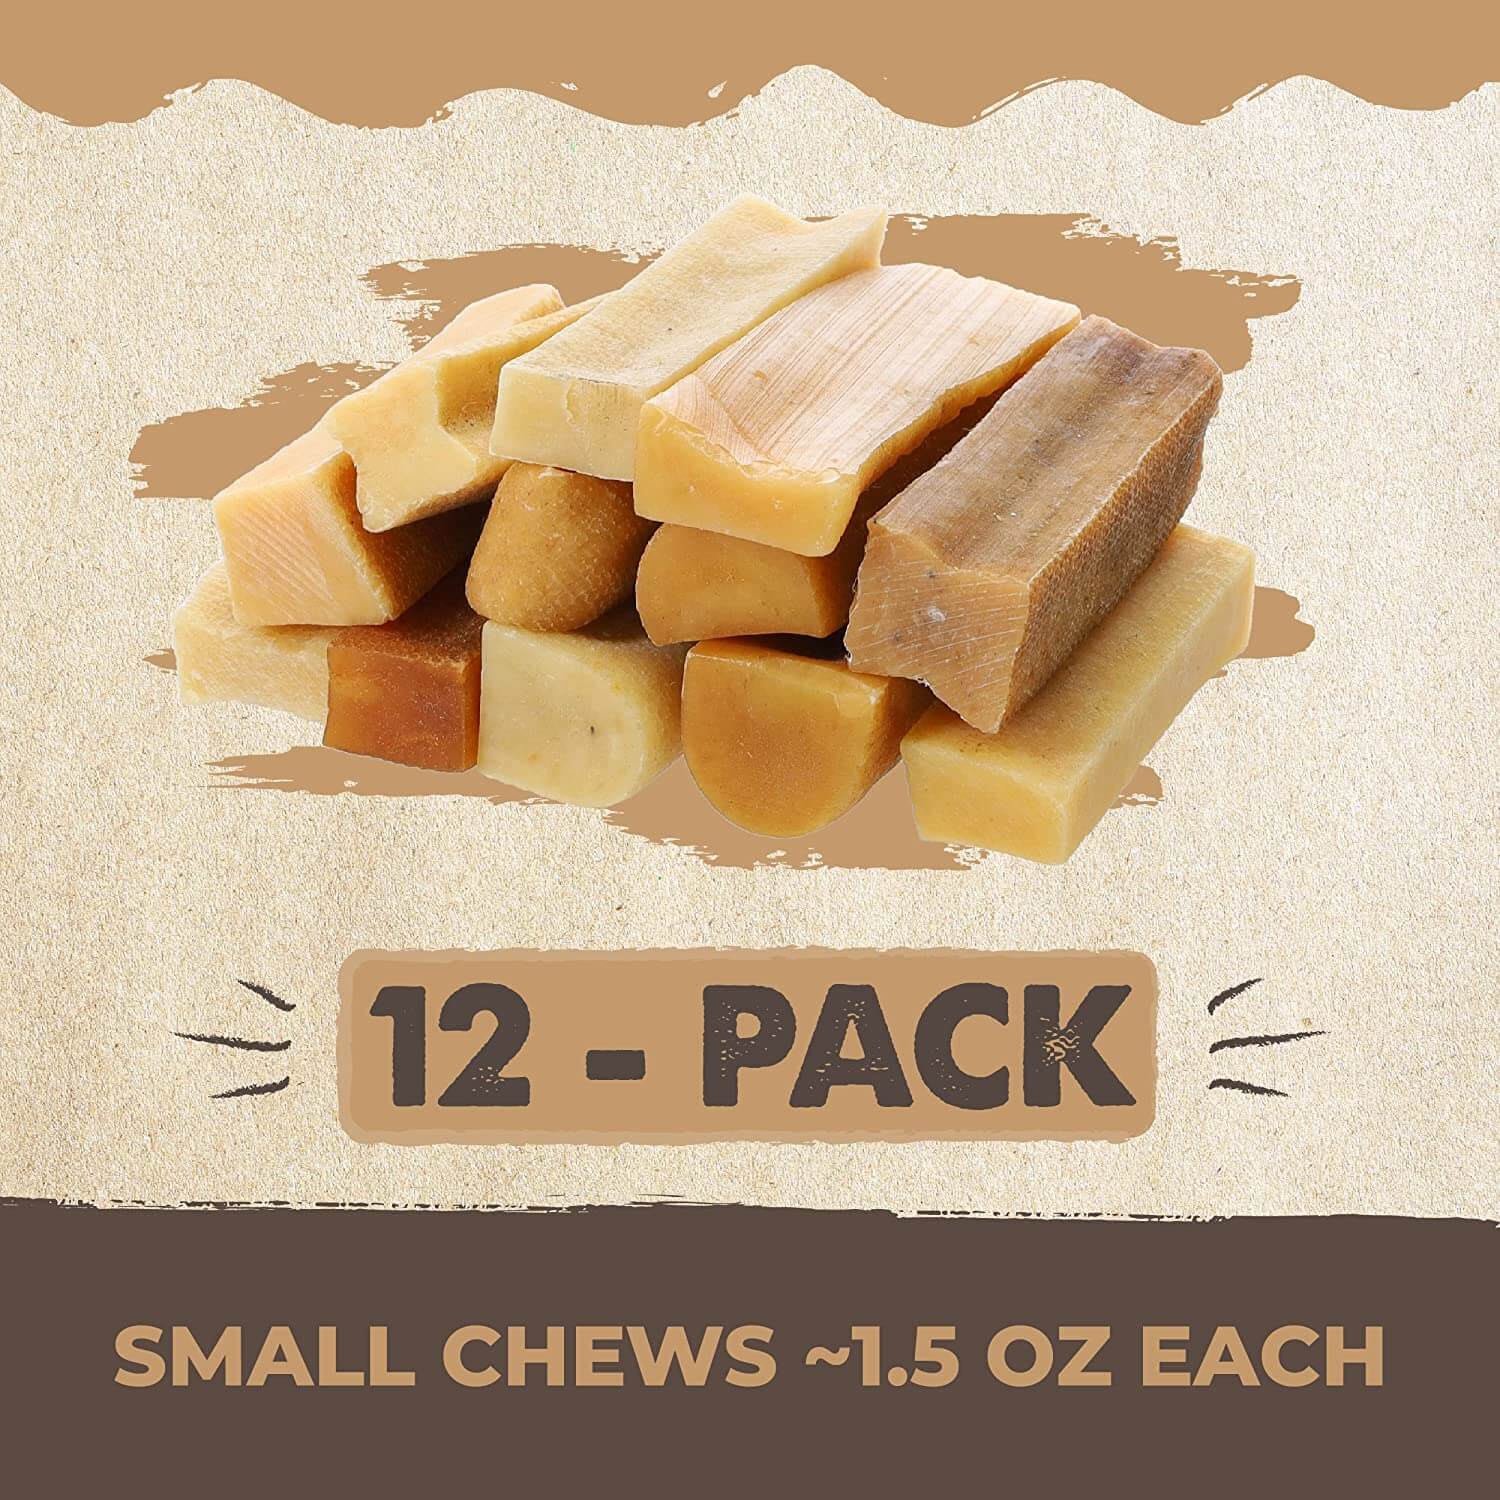 Mighty Paw Yak Cheese Dog Chews: All-Natural Treats for Your Pup